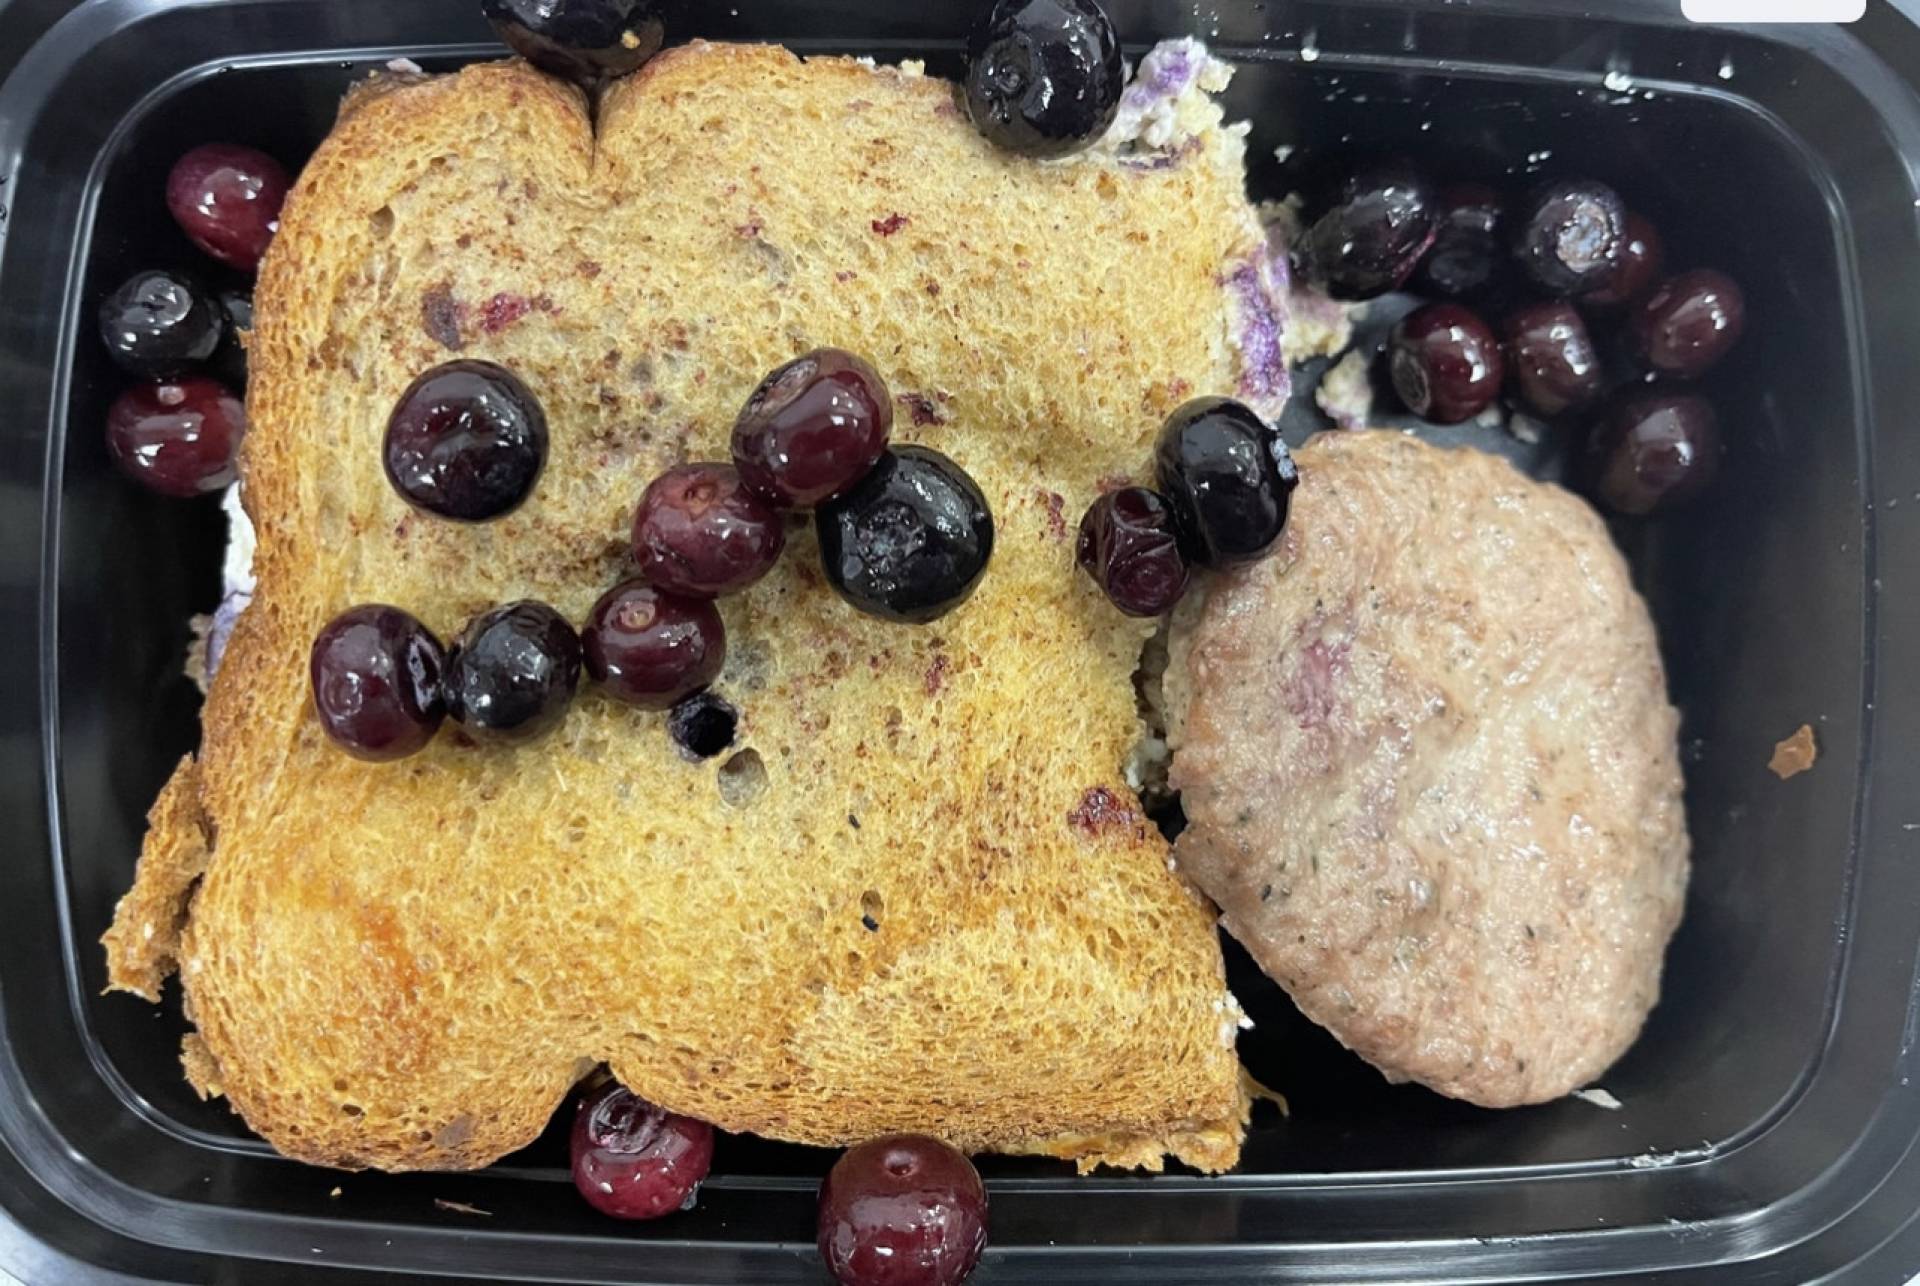 The Ervin Blueberry Sandwich (Blueberry Stuffed French Toast)